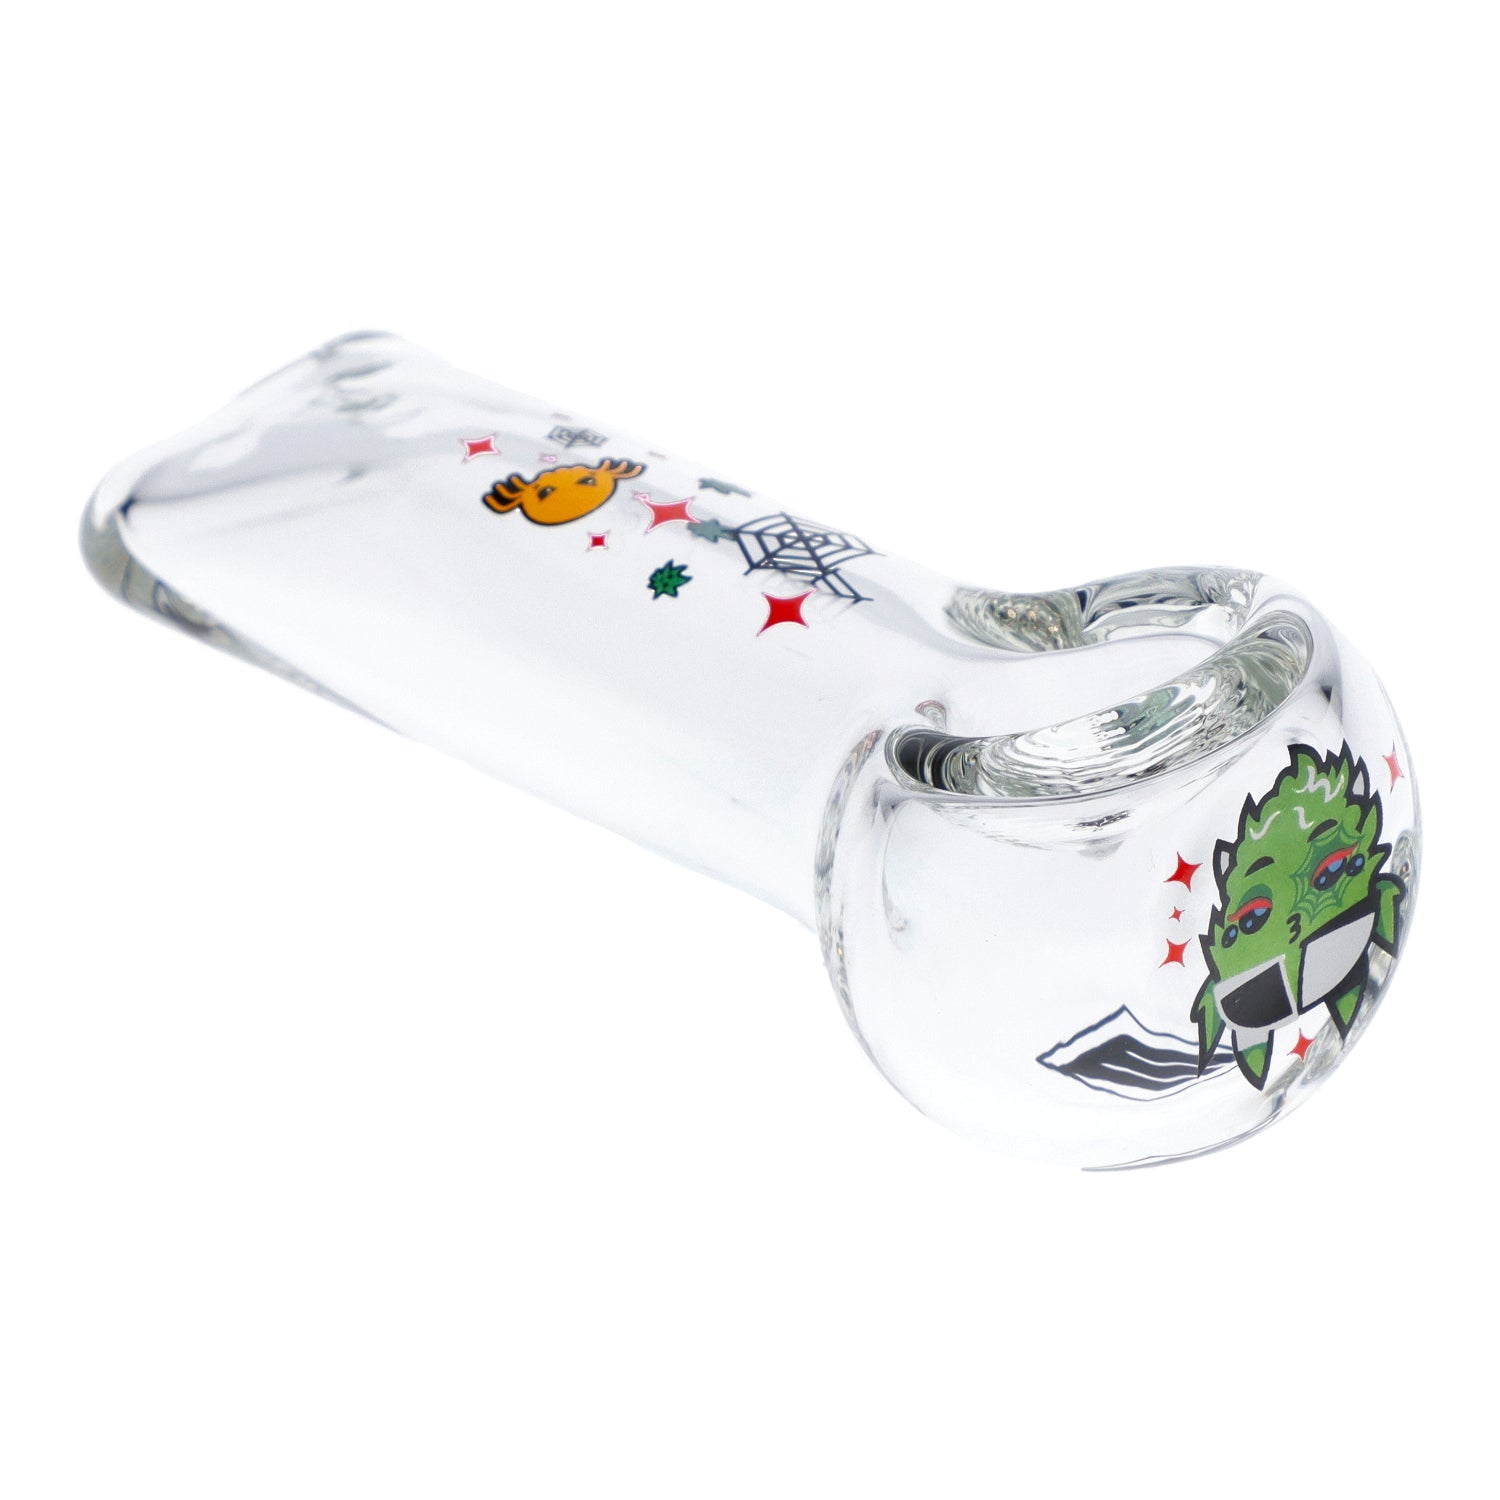 4" White Widow Hand Pipe - Clear